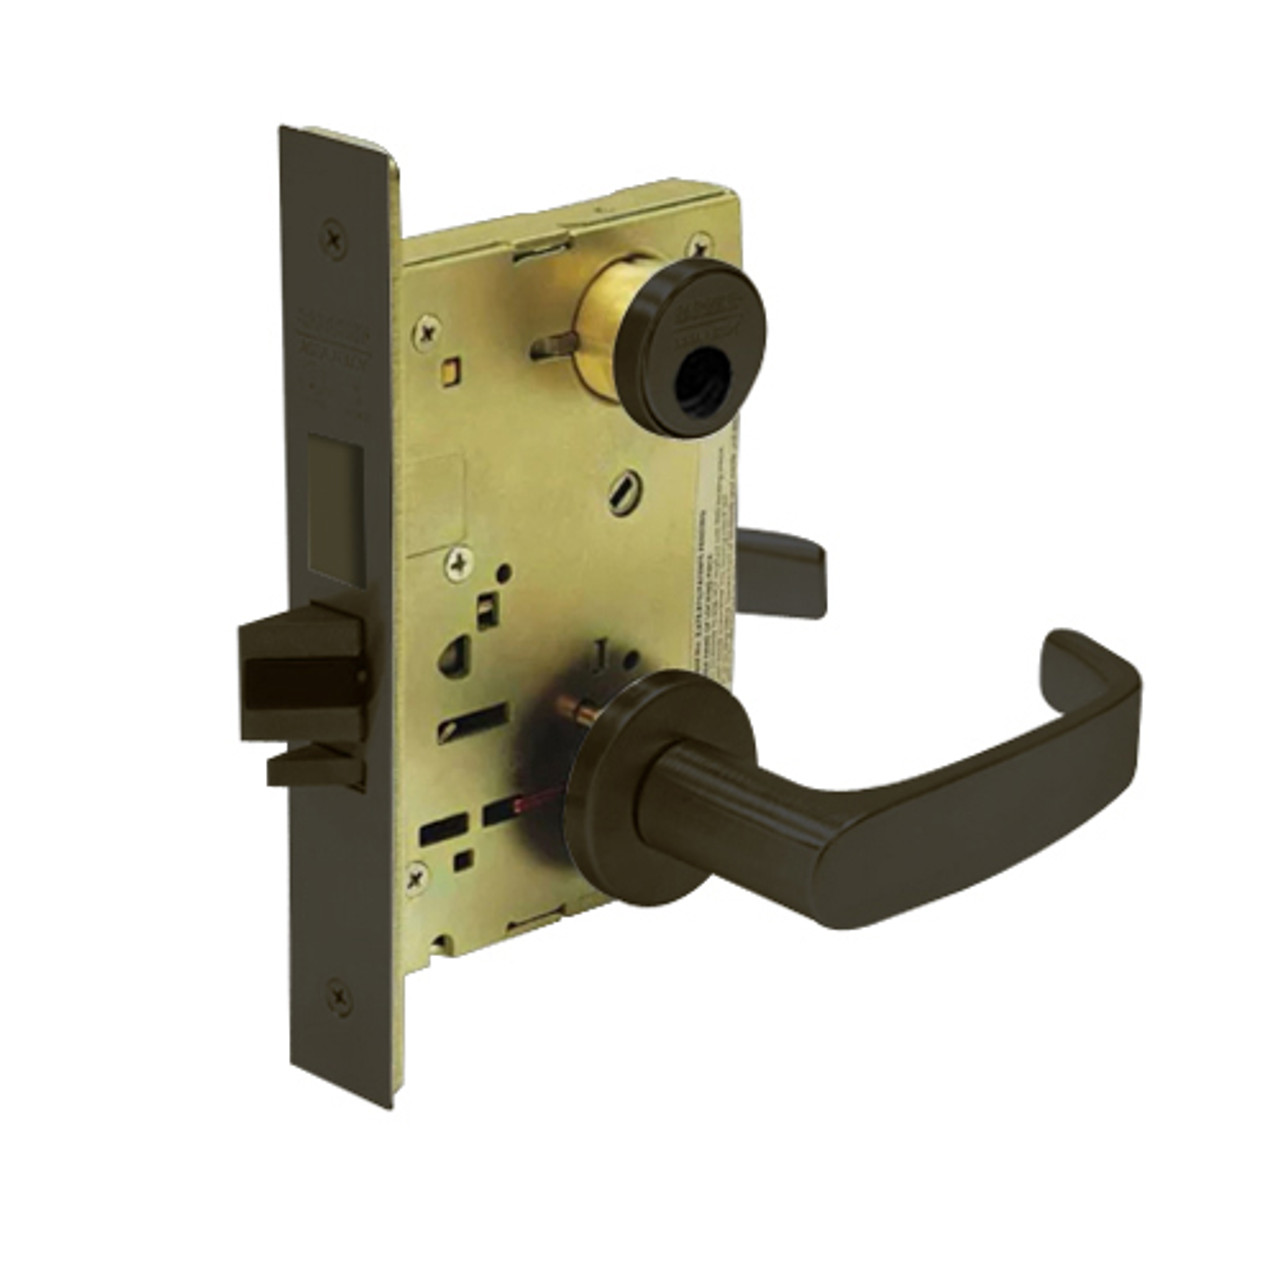 LC-8252-LNL-10B Sargent 8200 Series Institutional Mortise Lock with LNL Lever Trim Less Cylinder in Oxidized Dull Bronze